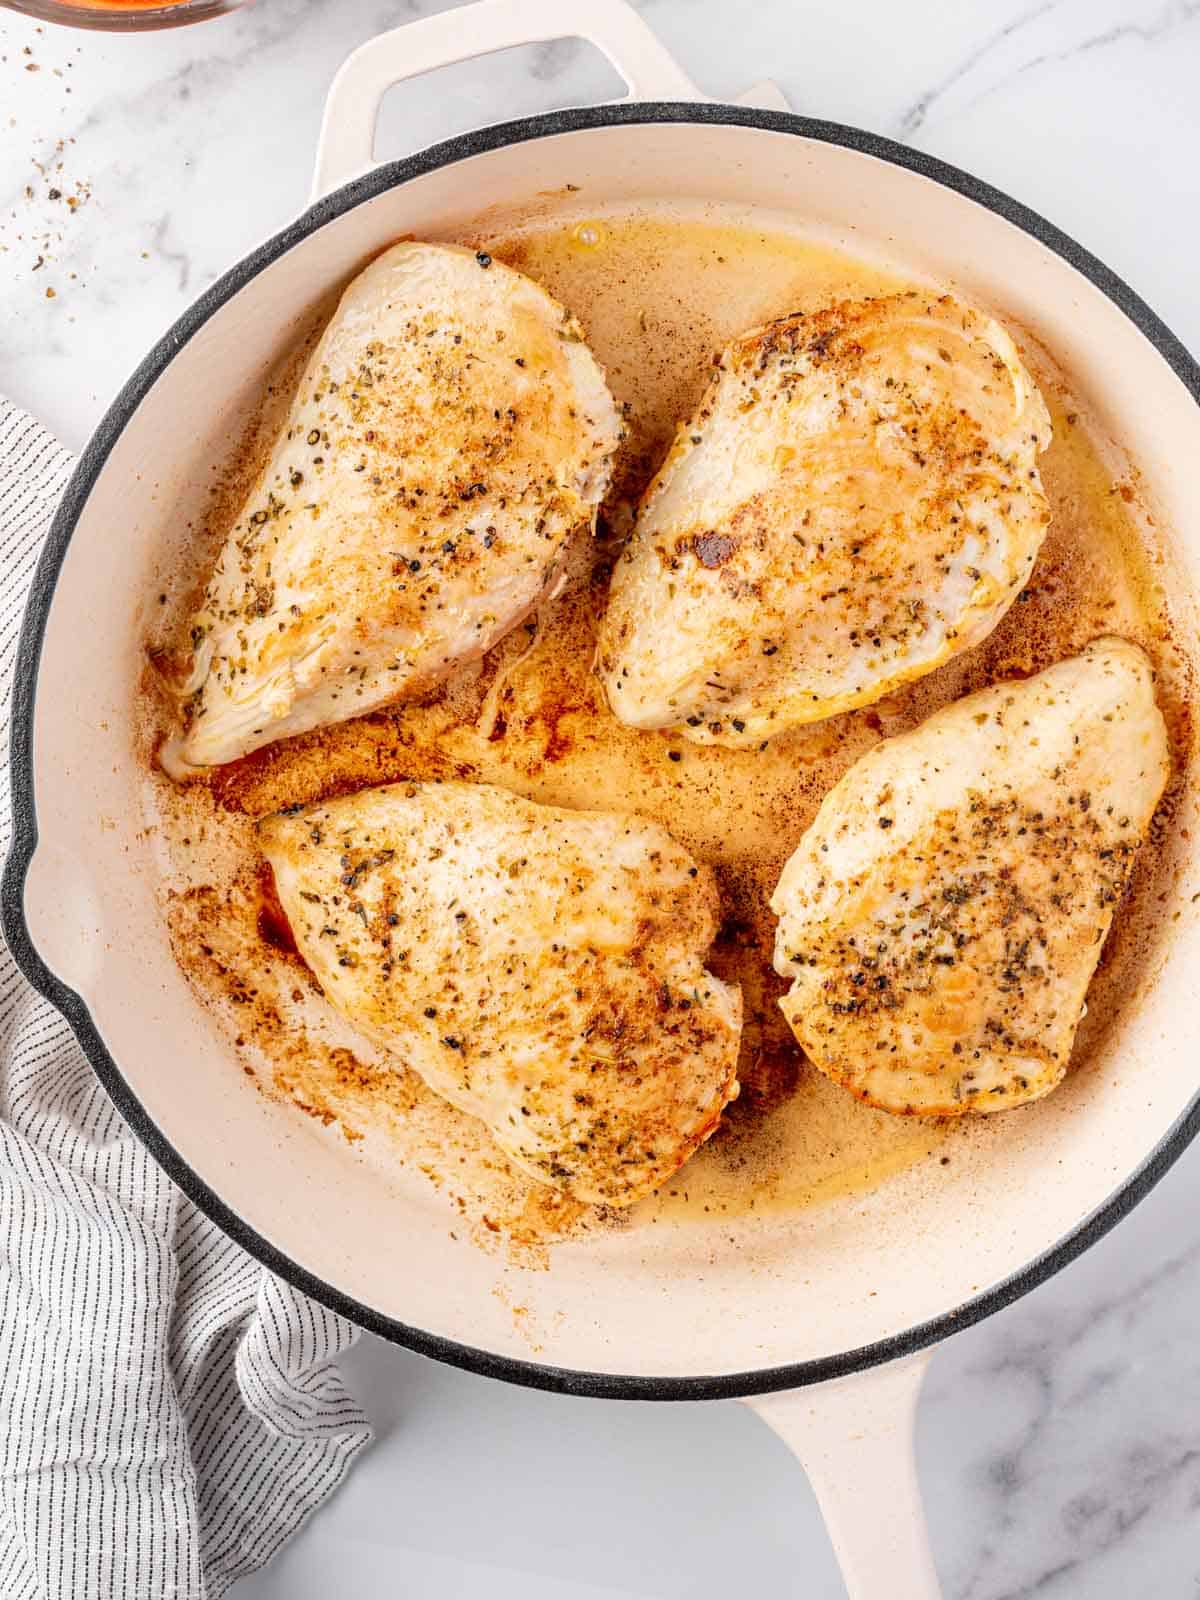 Chicken seared in a pan.